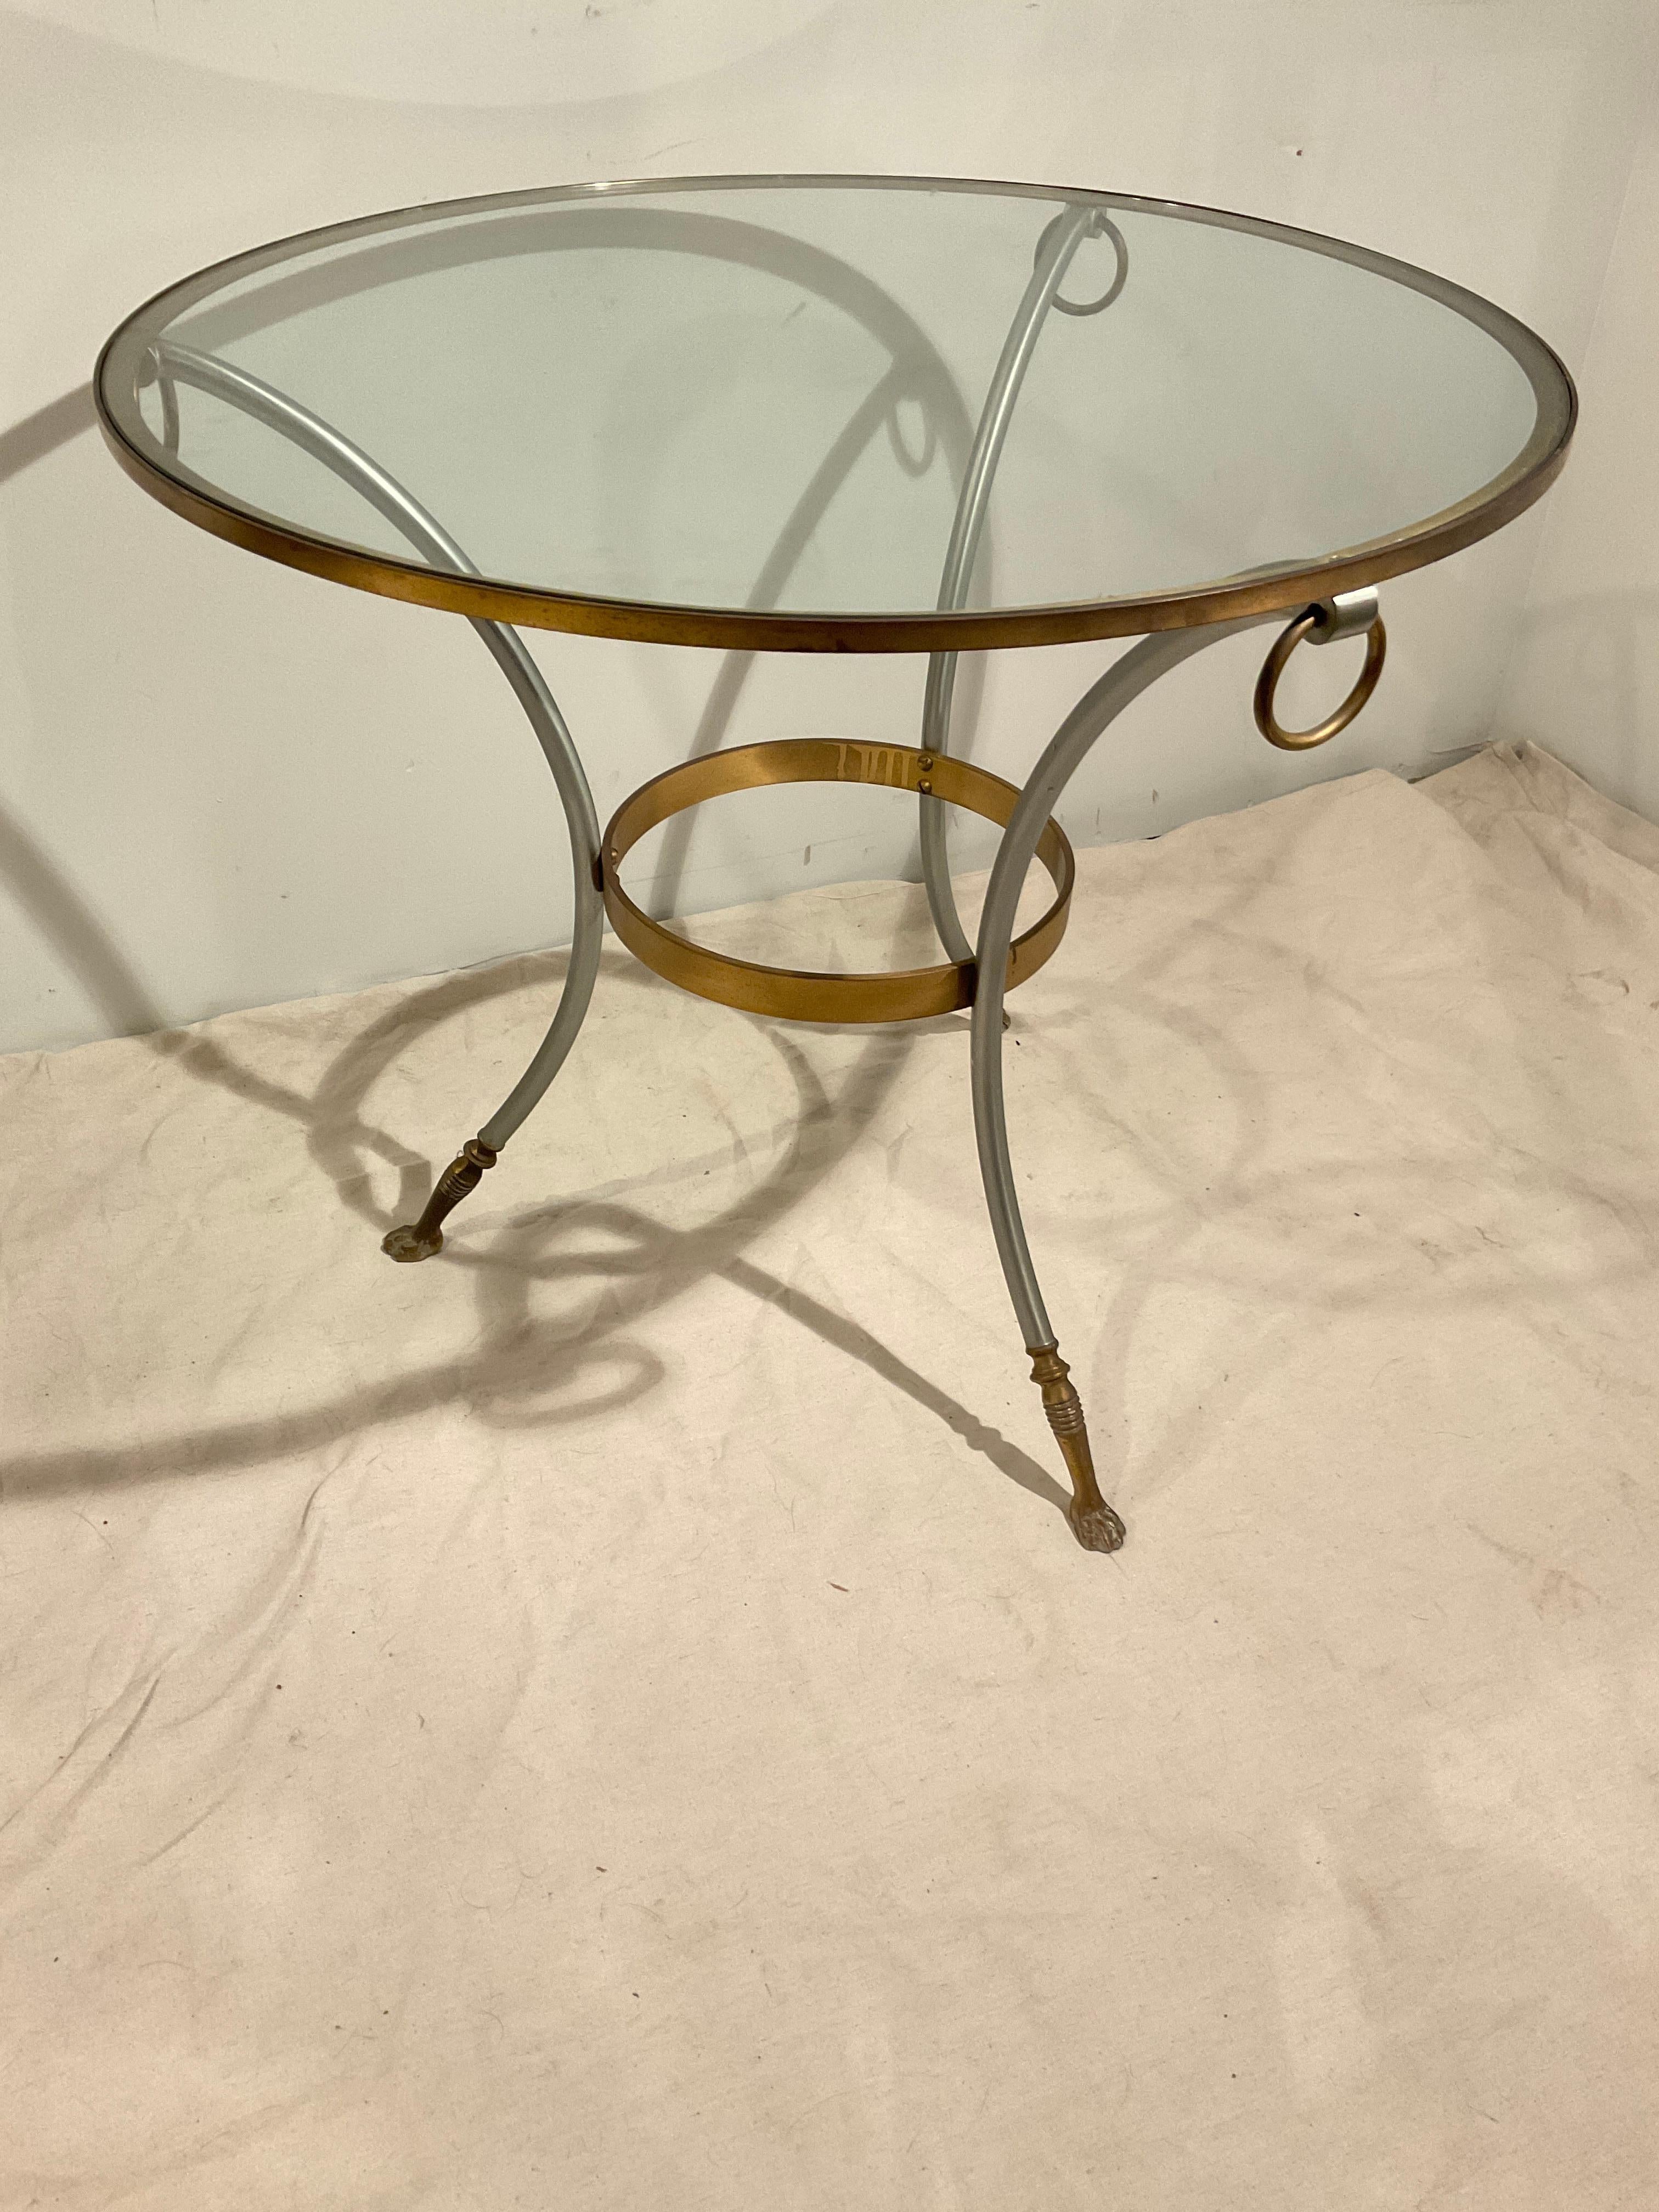  Maison Jansen Style Gueridon Table In Good Condition For Sale In Tarrytown, NY